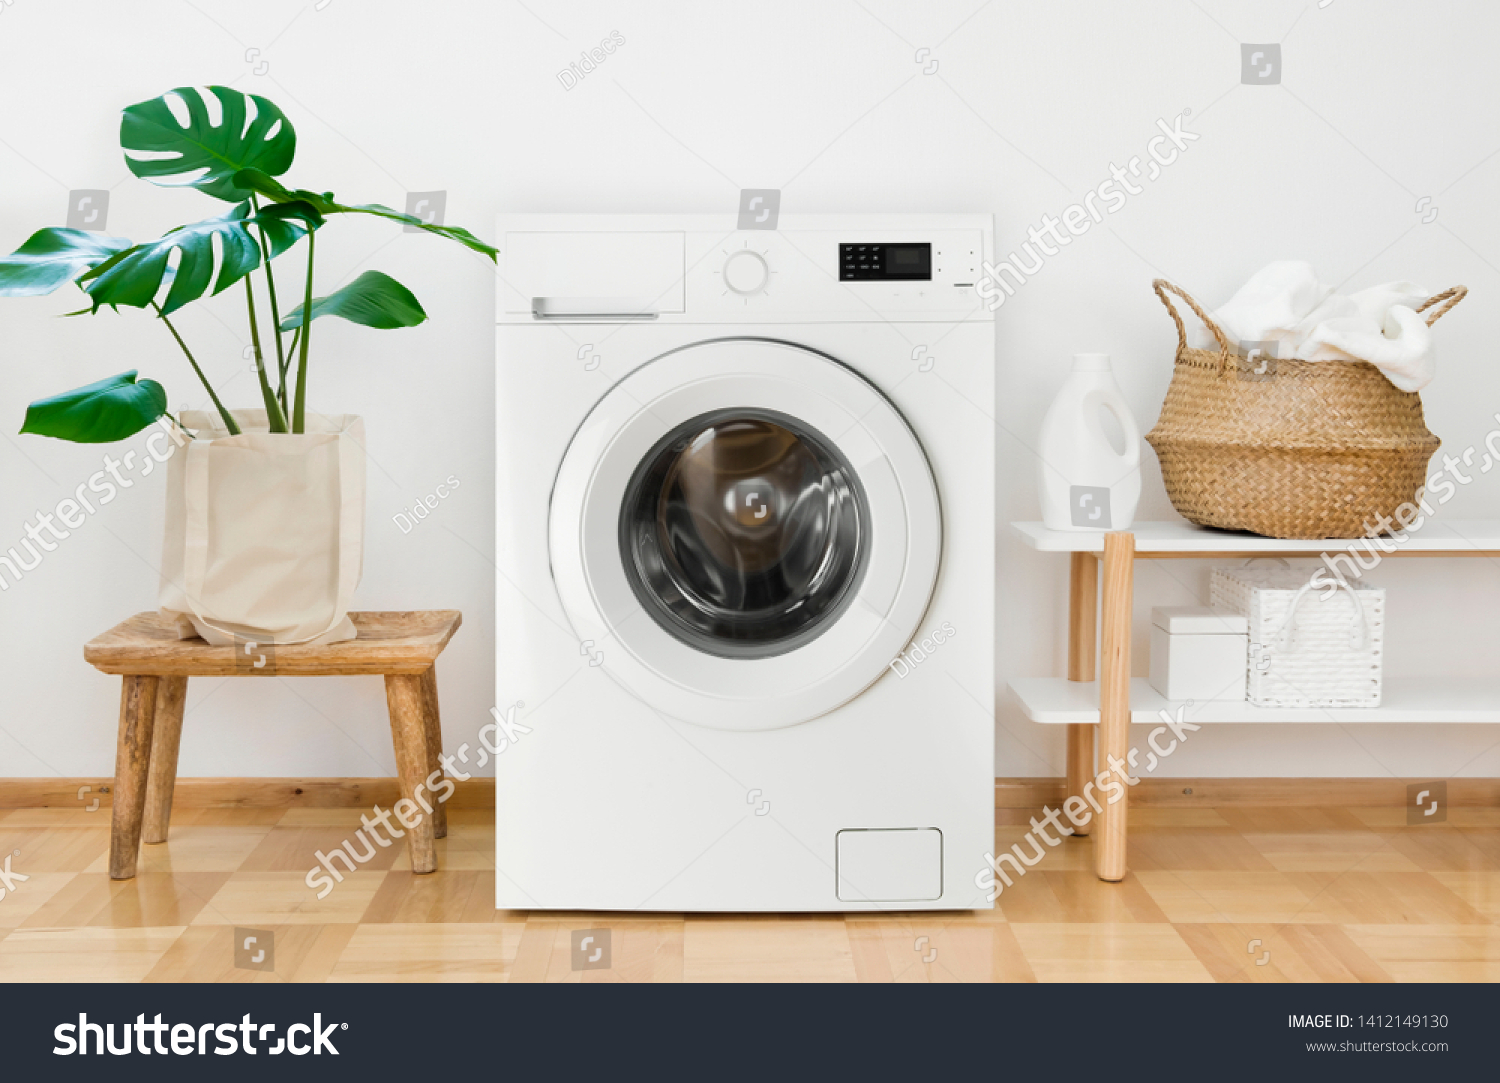 Clothes washing machine in laundry room interior #1412149130